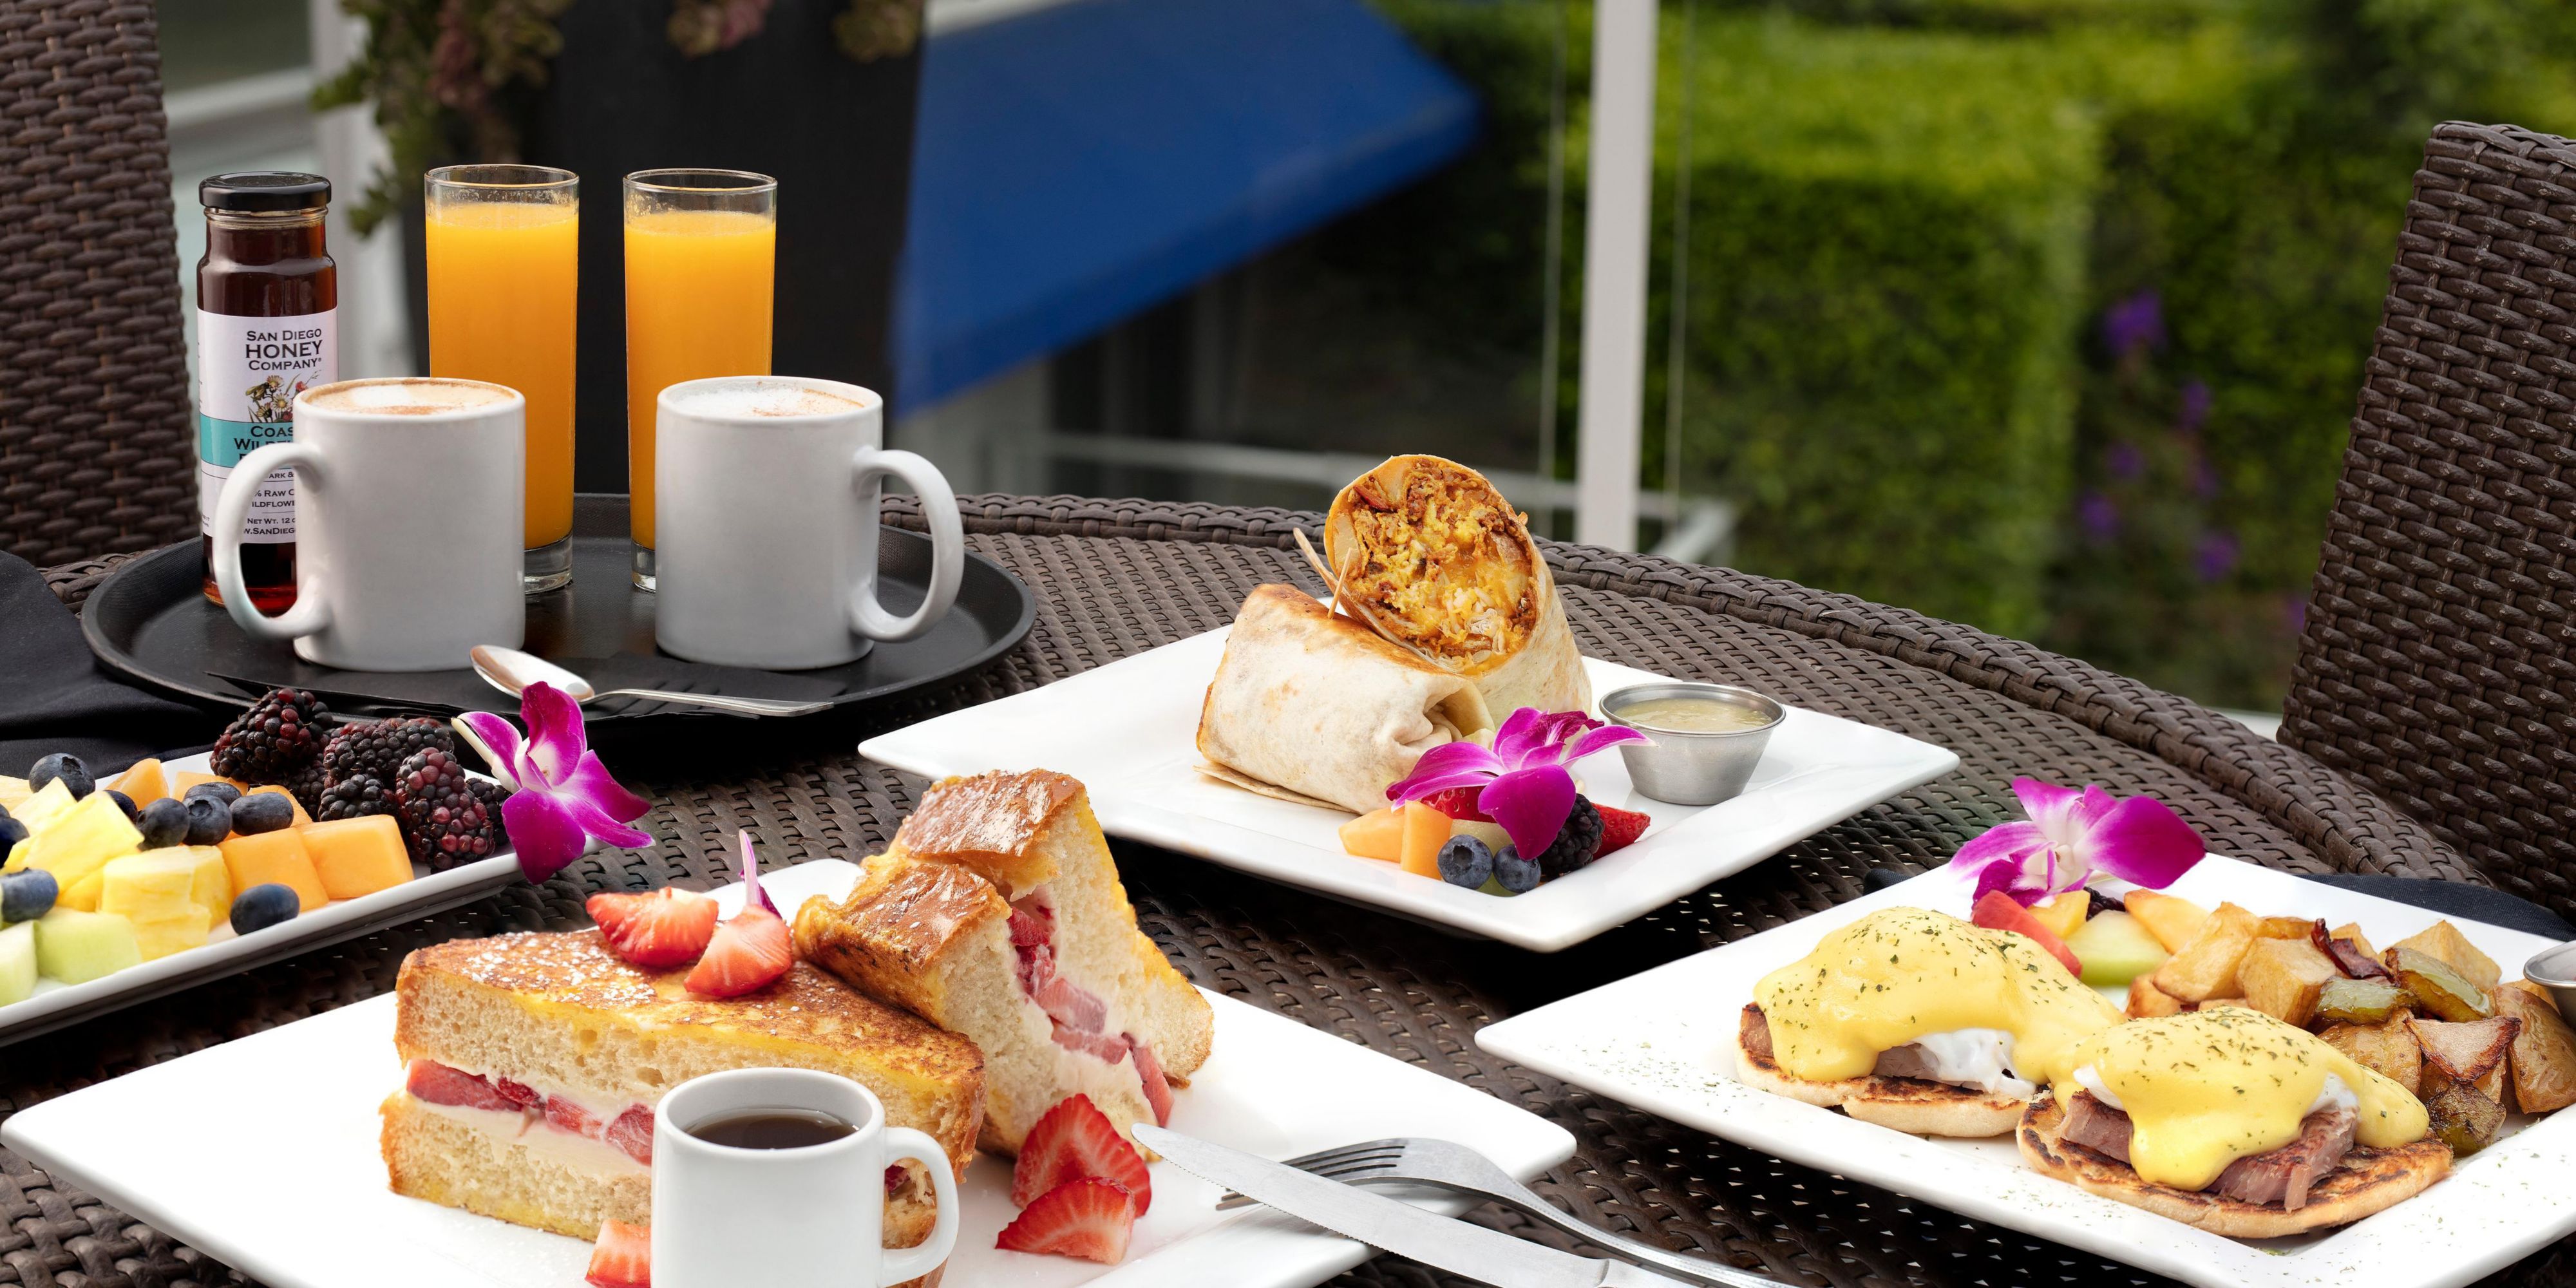 Our breakfast menu offers a diverse, delicious array of dishes.